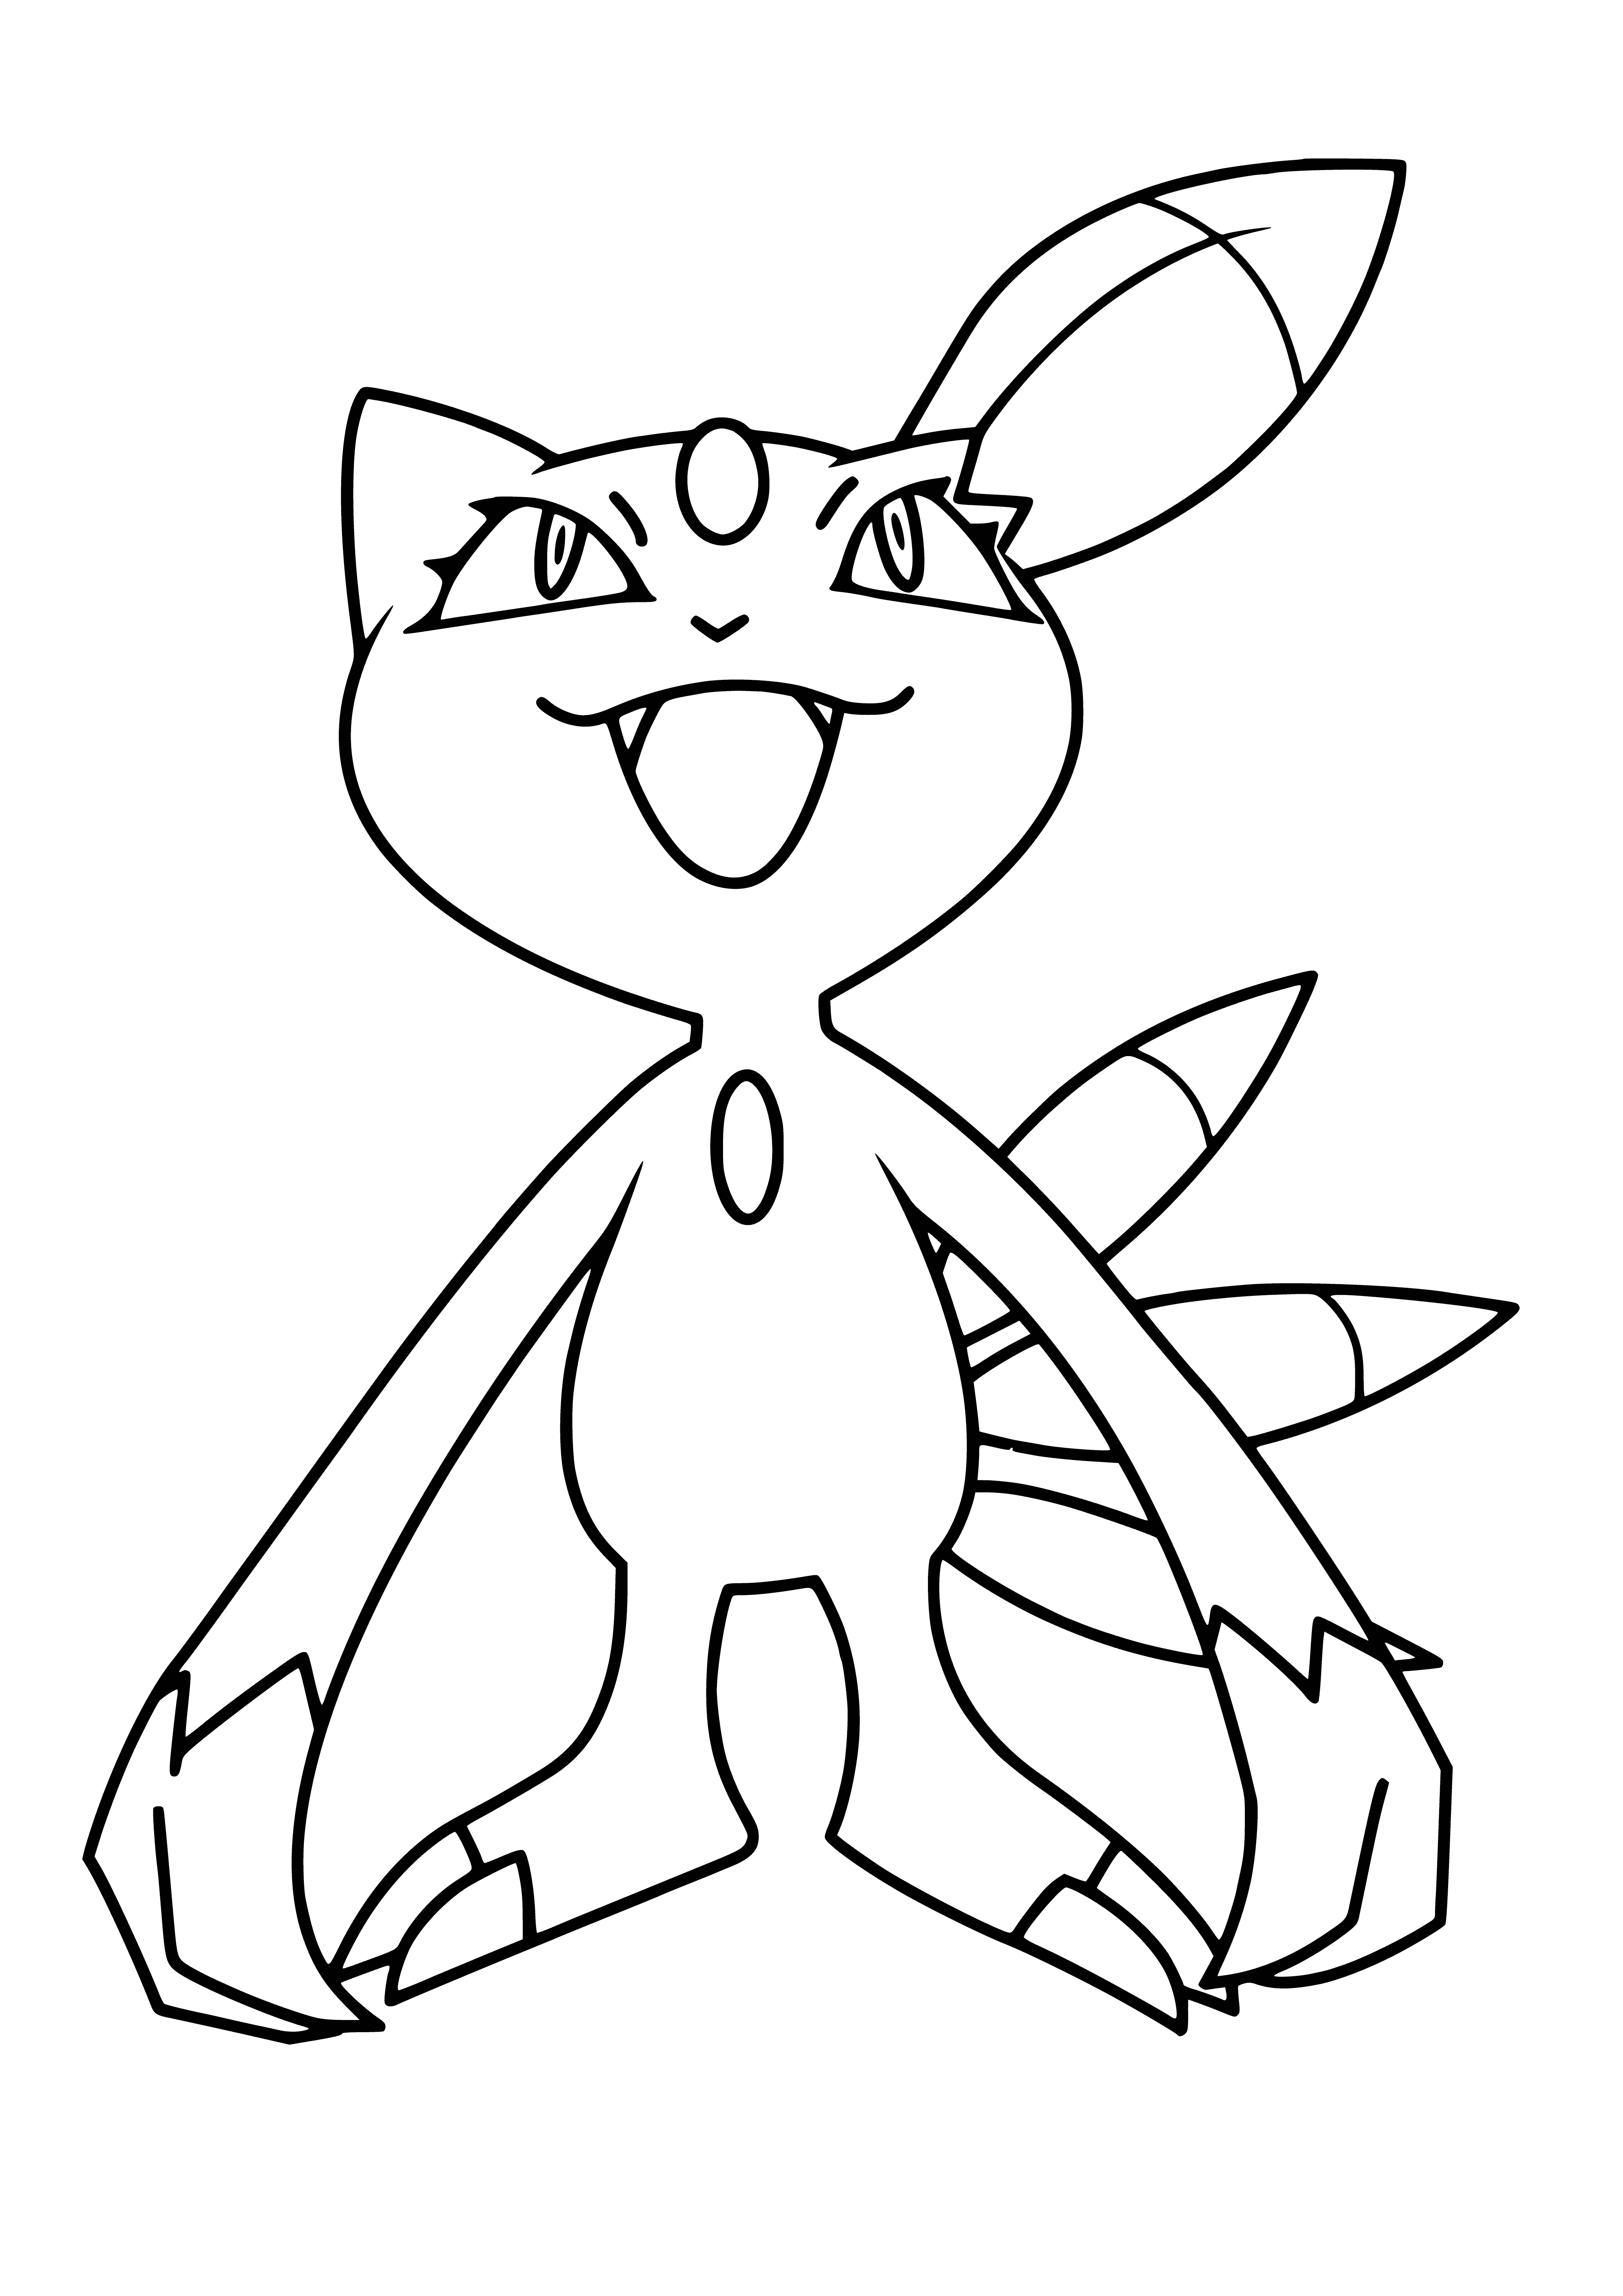 Pokemon Sneasel coloring page